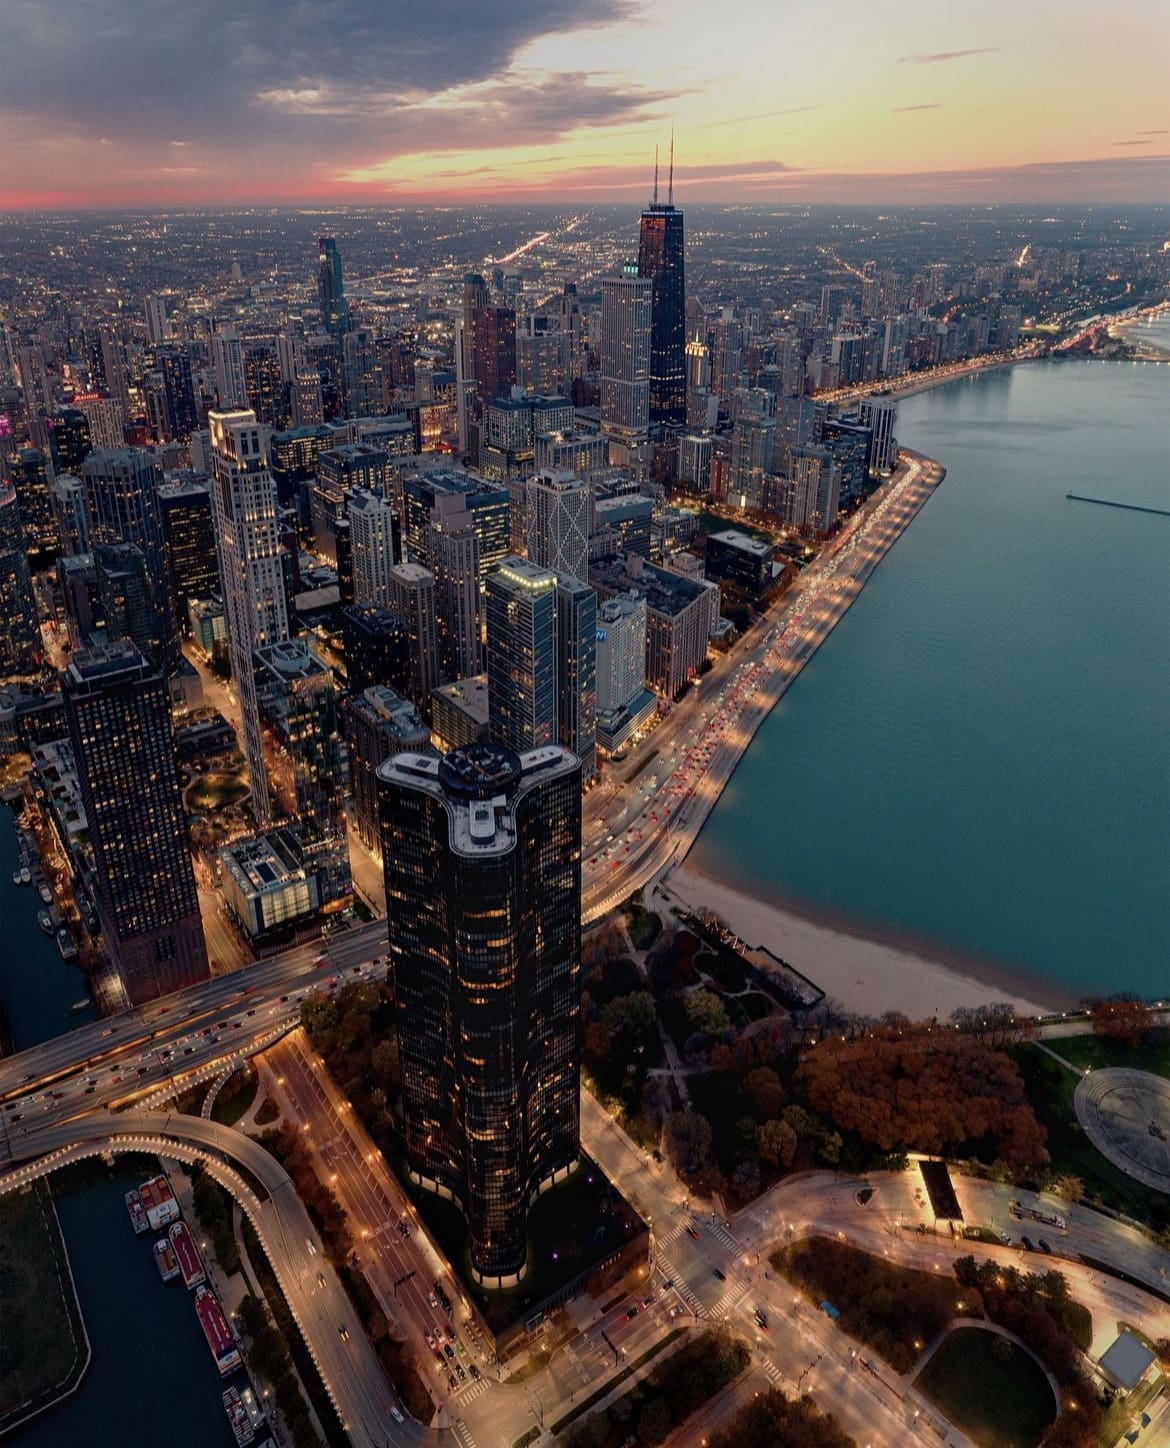 Sunset over the city - The Weather in Chicago, US